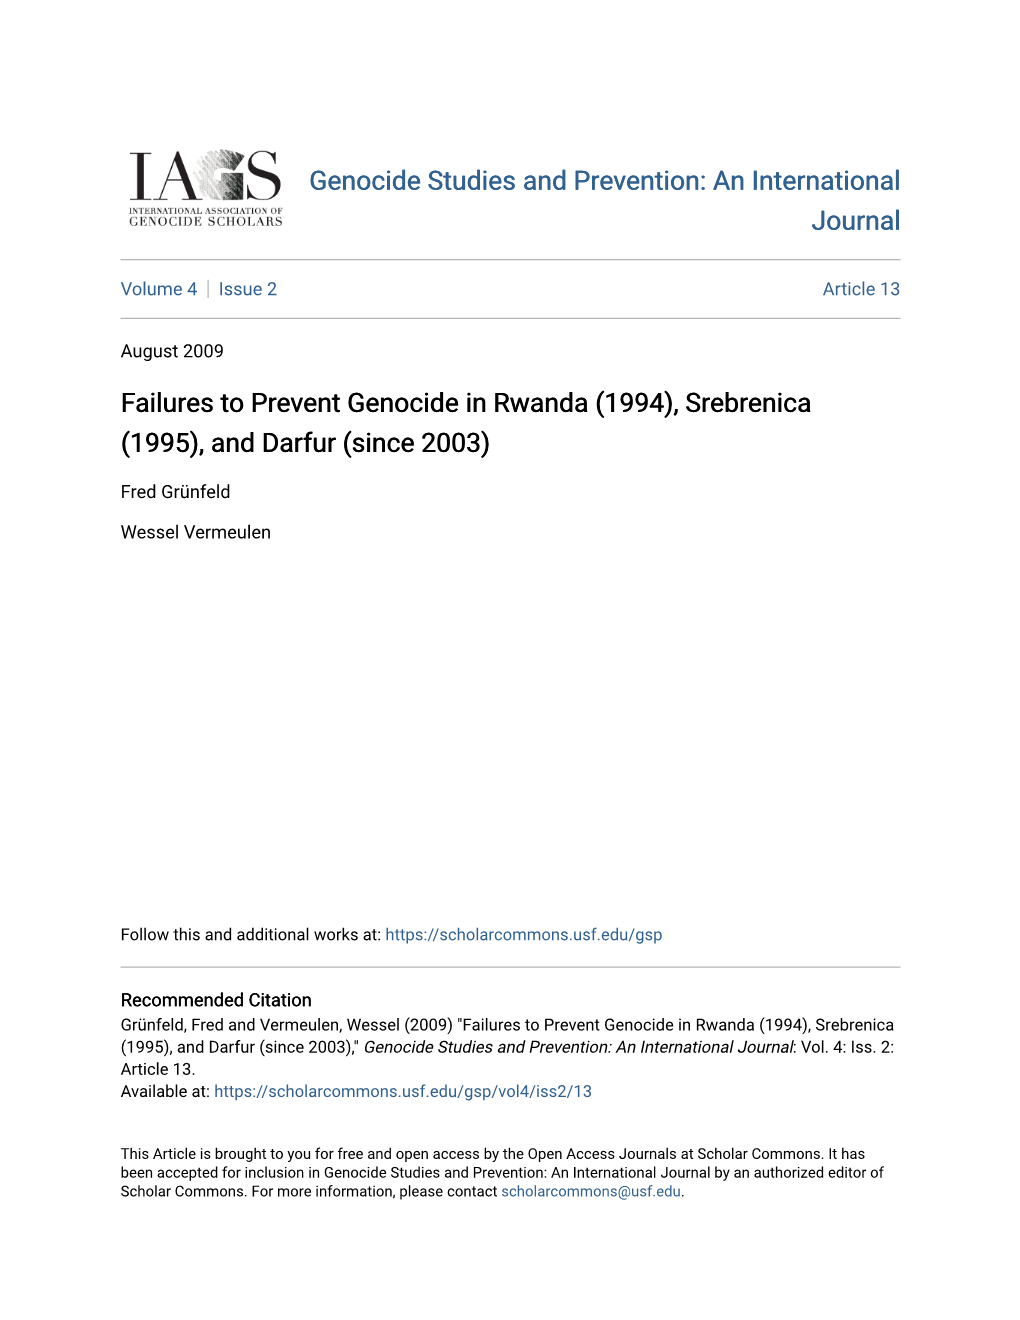 Failures to Prevent Genocide in Rwanda (1994), Srebrenica (1995), and Darfur (Since 2003)